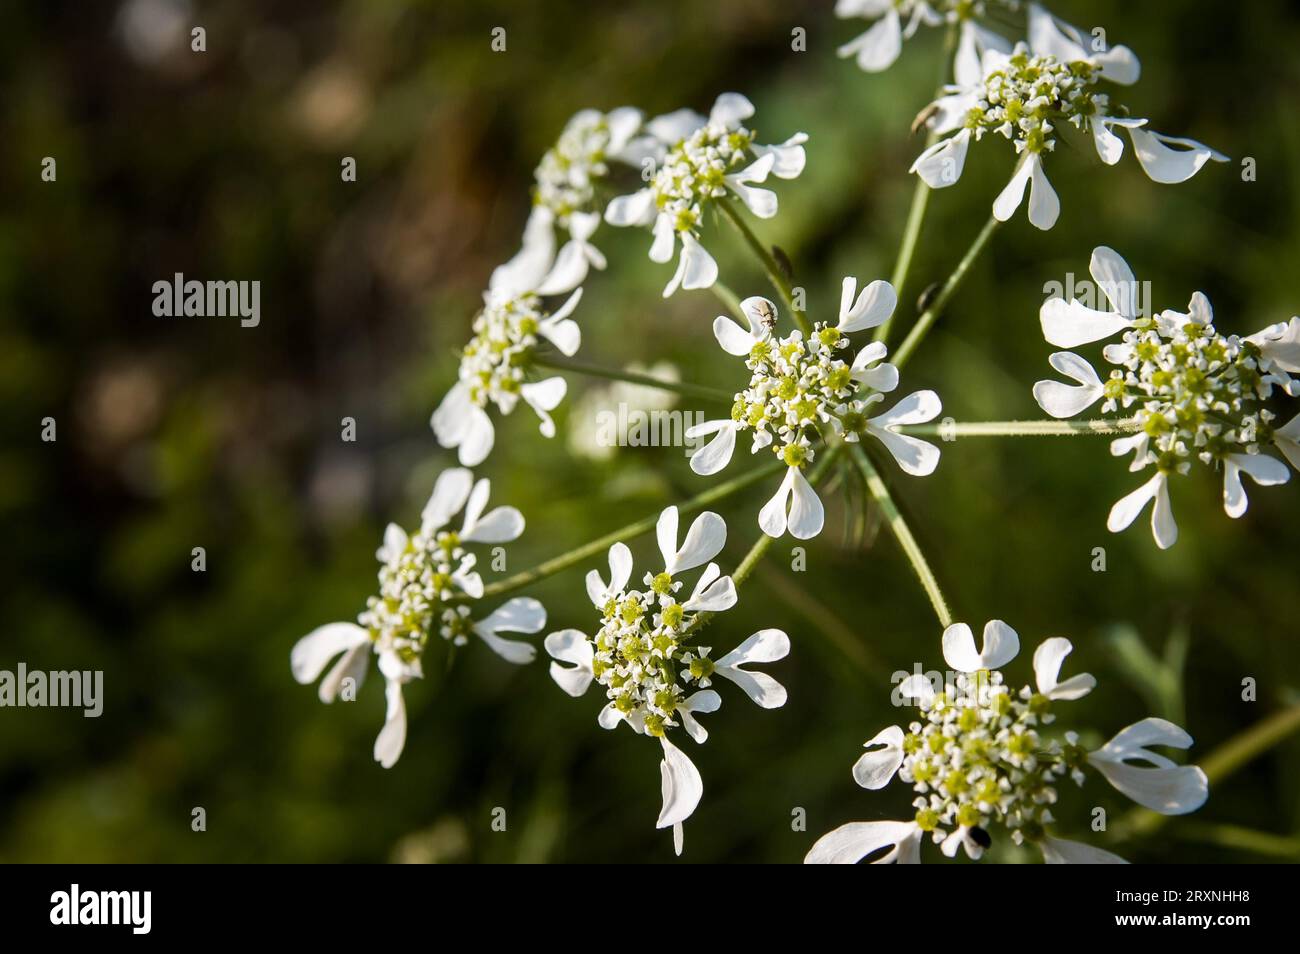 Closeup of a (Tordylium Apulum) flower from the Apiaceae family Stock Photo